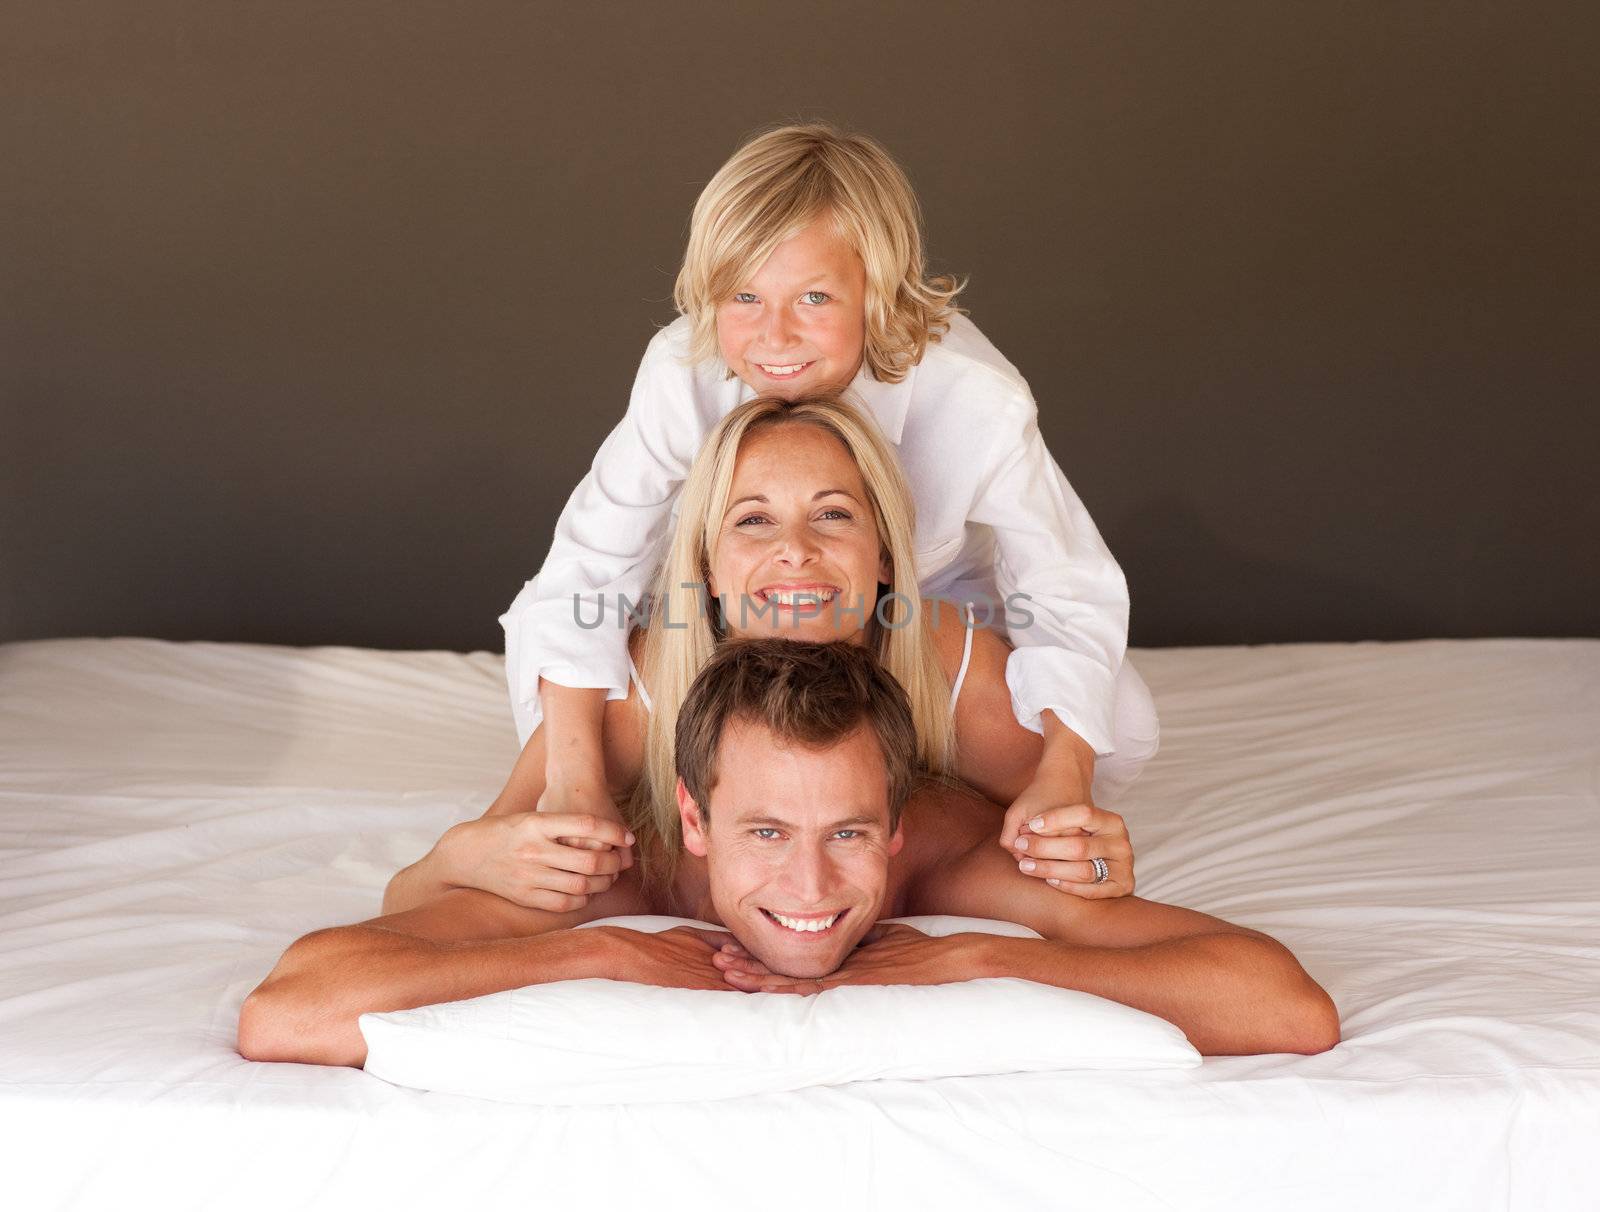 Adorable little boy and his parents having fun lying on the bed by Wavebreakmedia